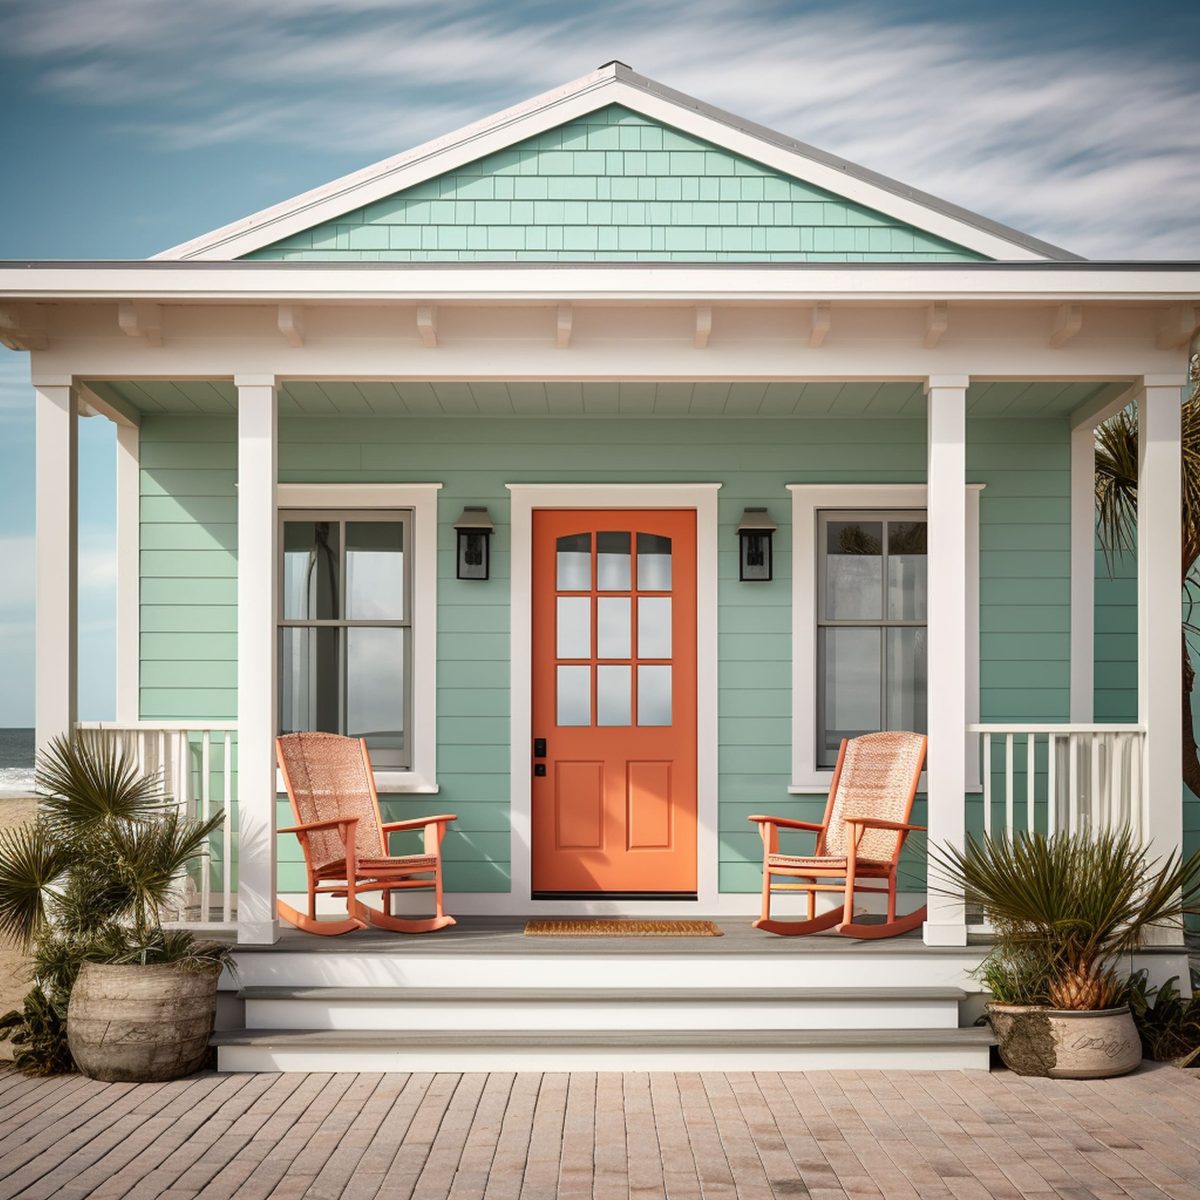 A Coastal Mint Green House With a Coral Front Door and Matching Chairs